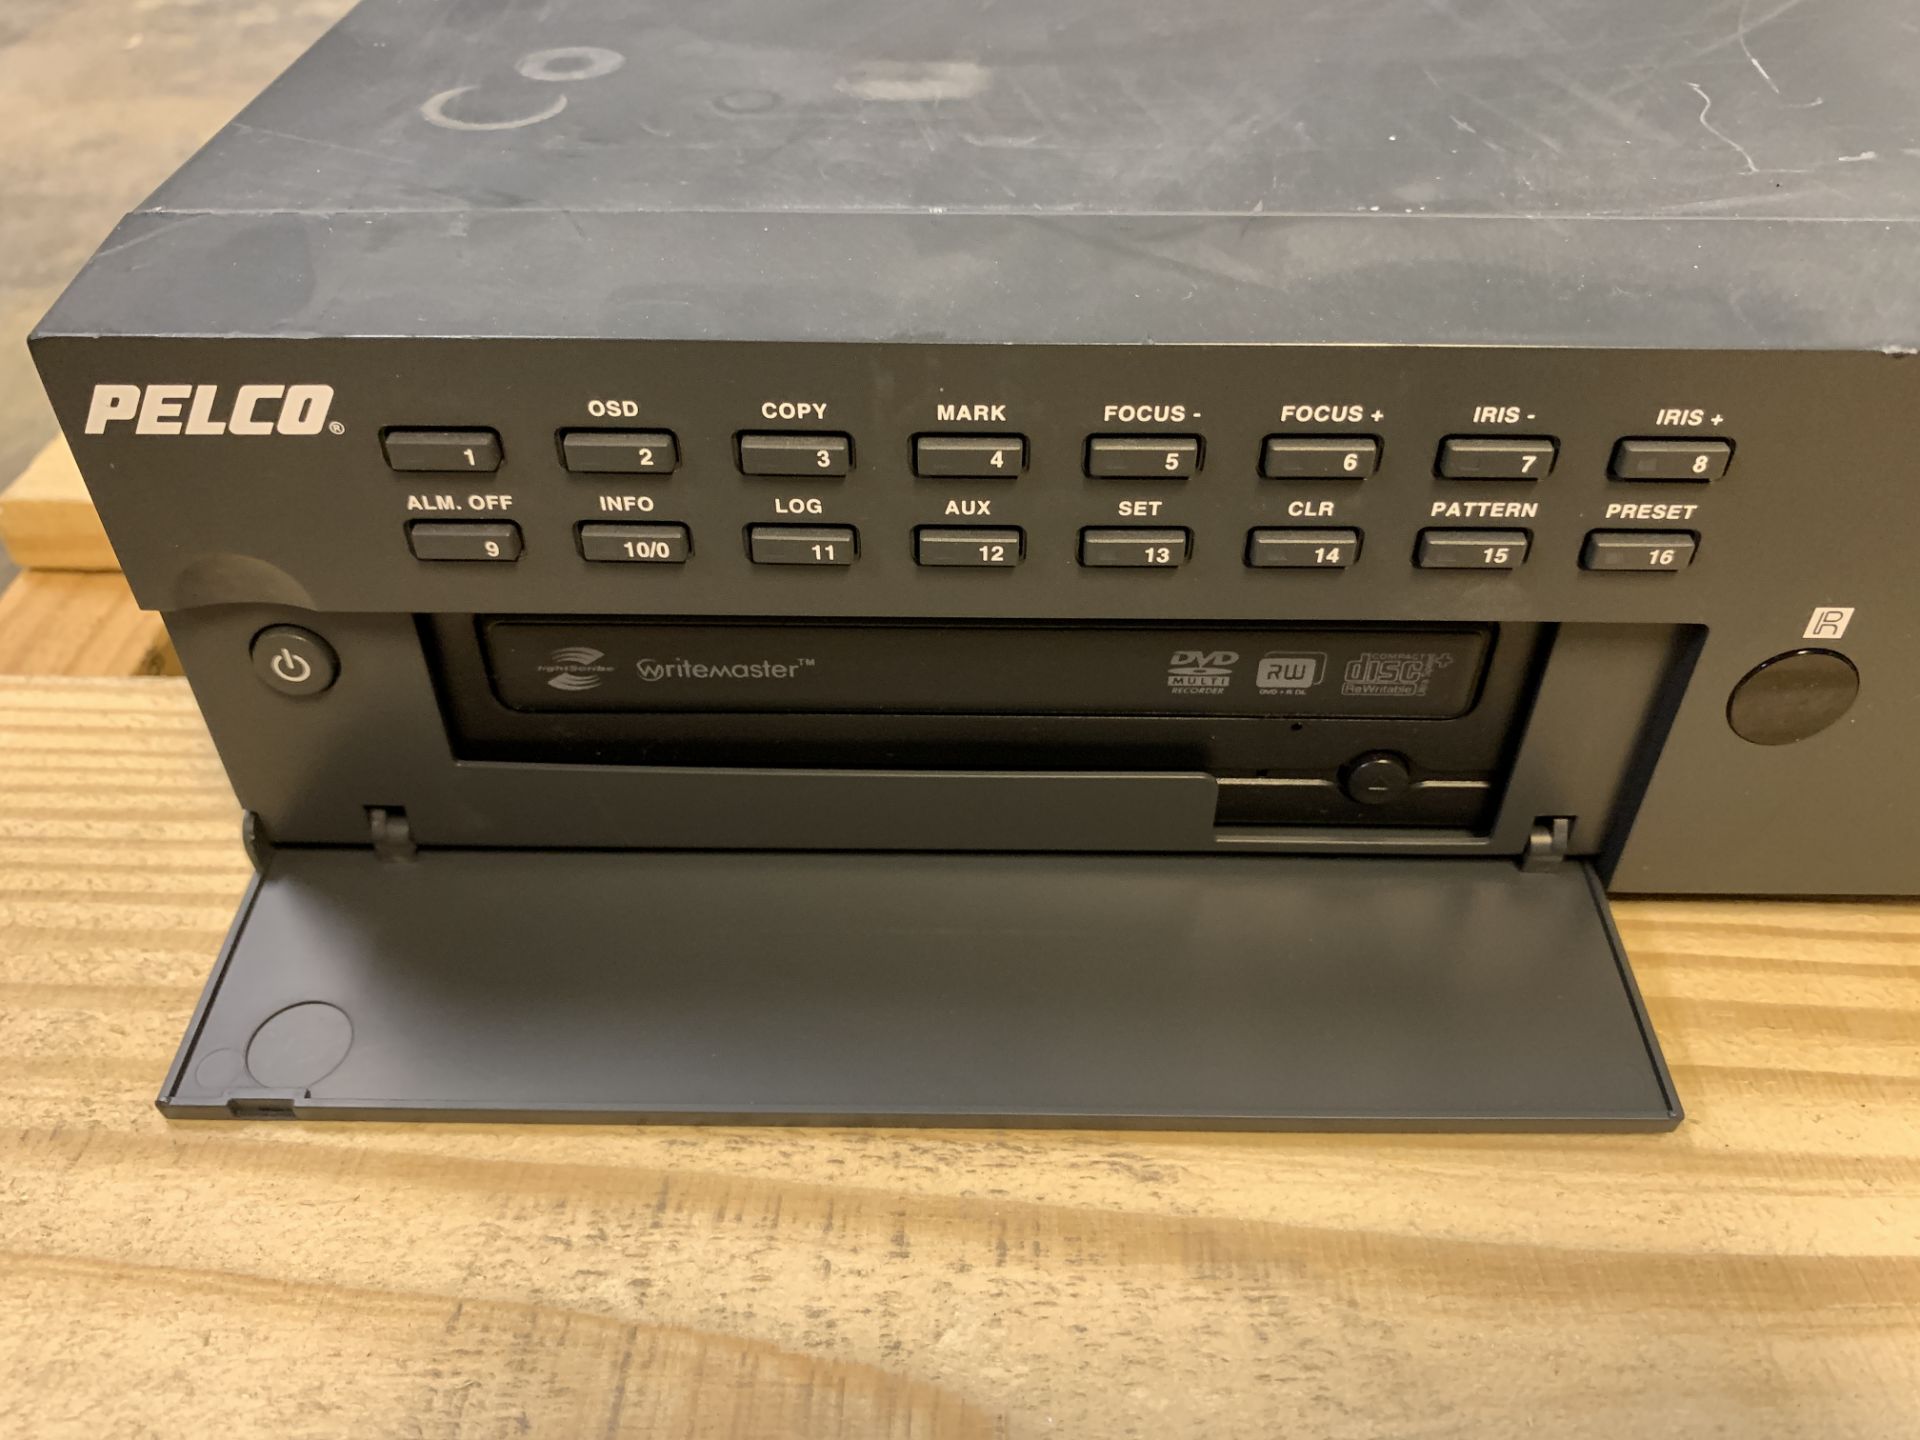 PELCO DX 4600 SERIES DIGITAL VIDEO RECORDER - Image 4 of 5